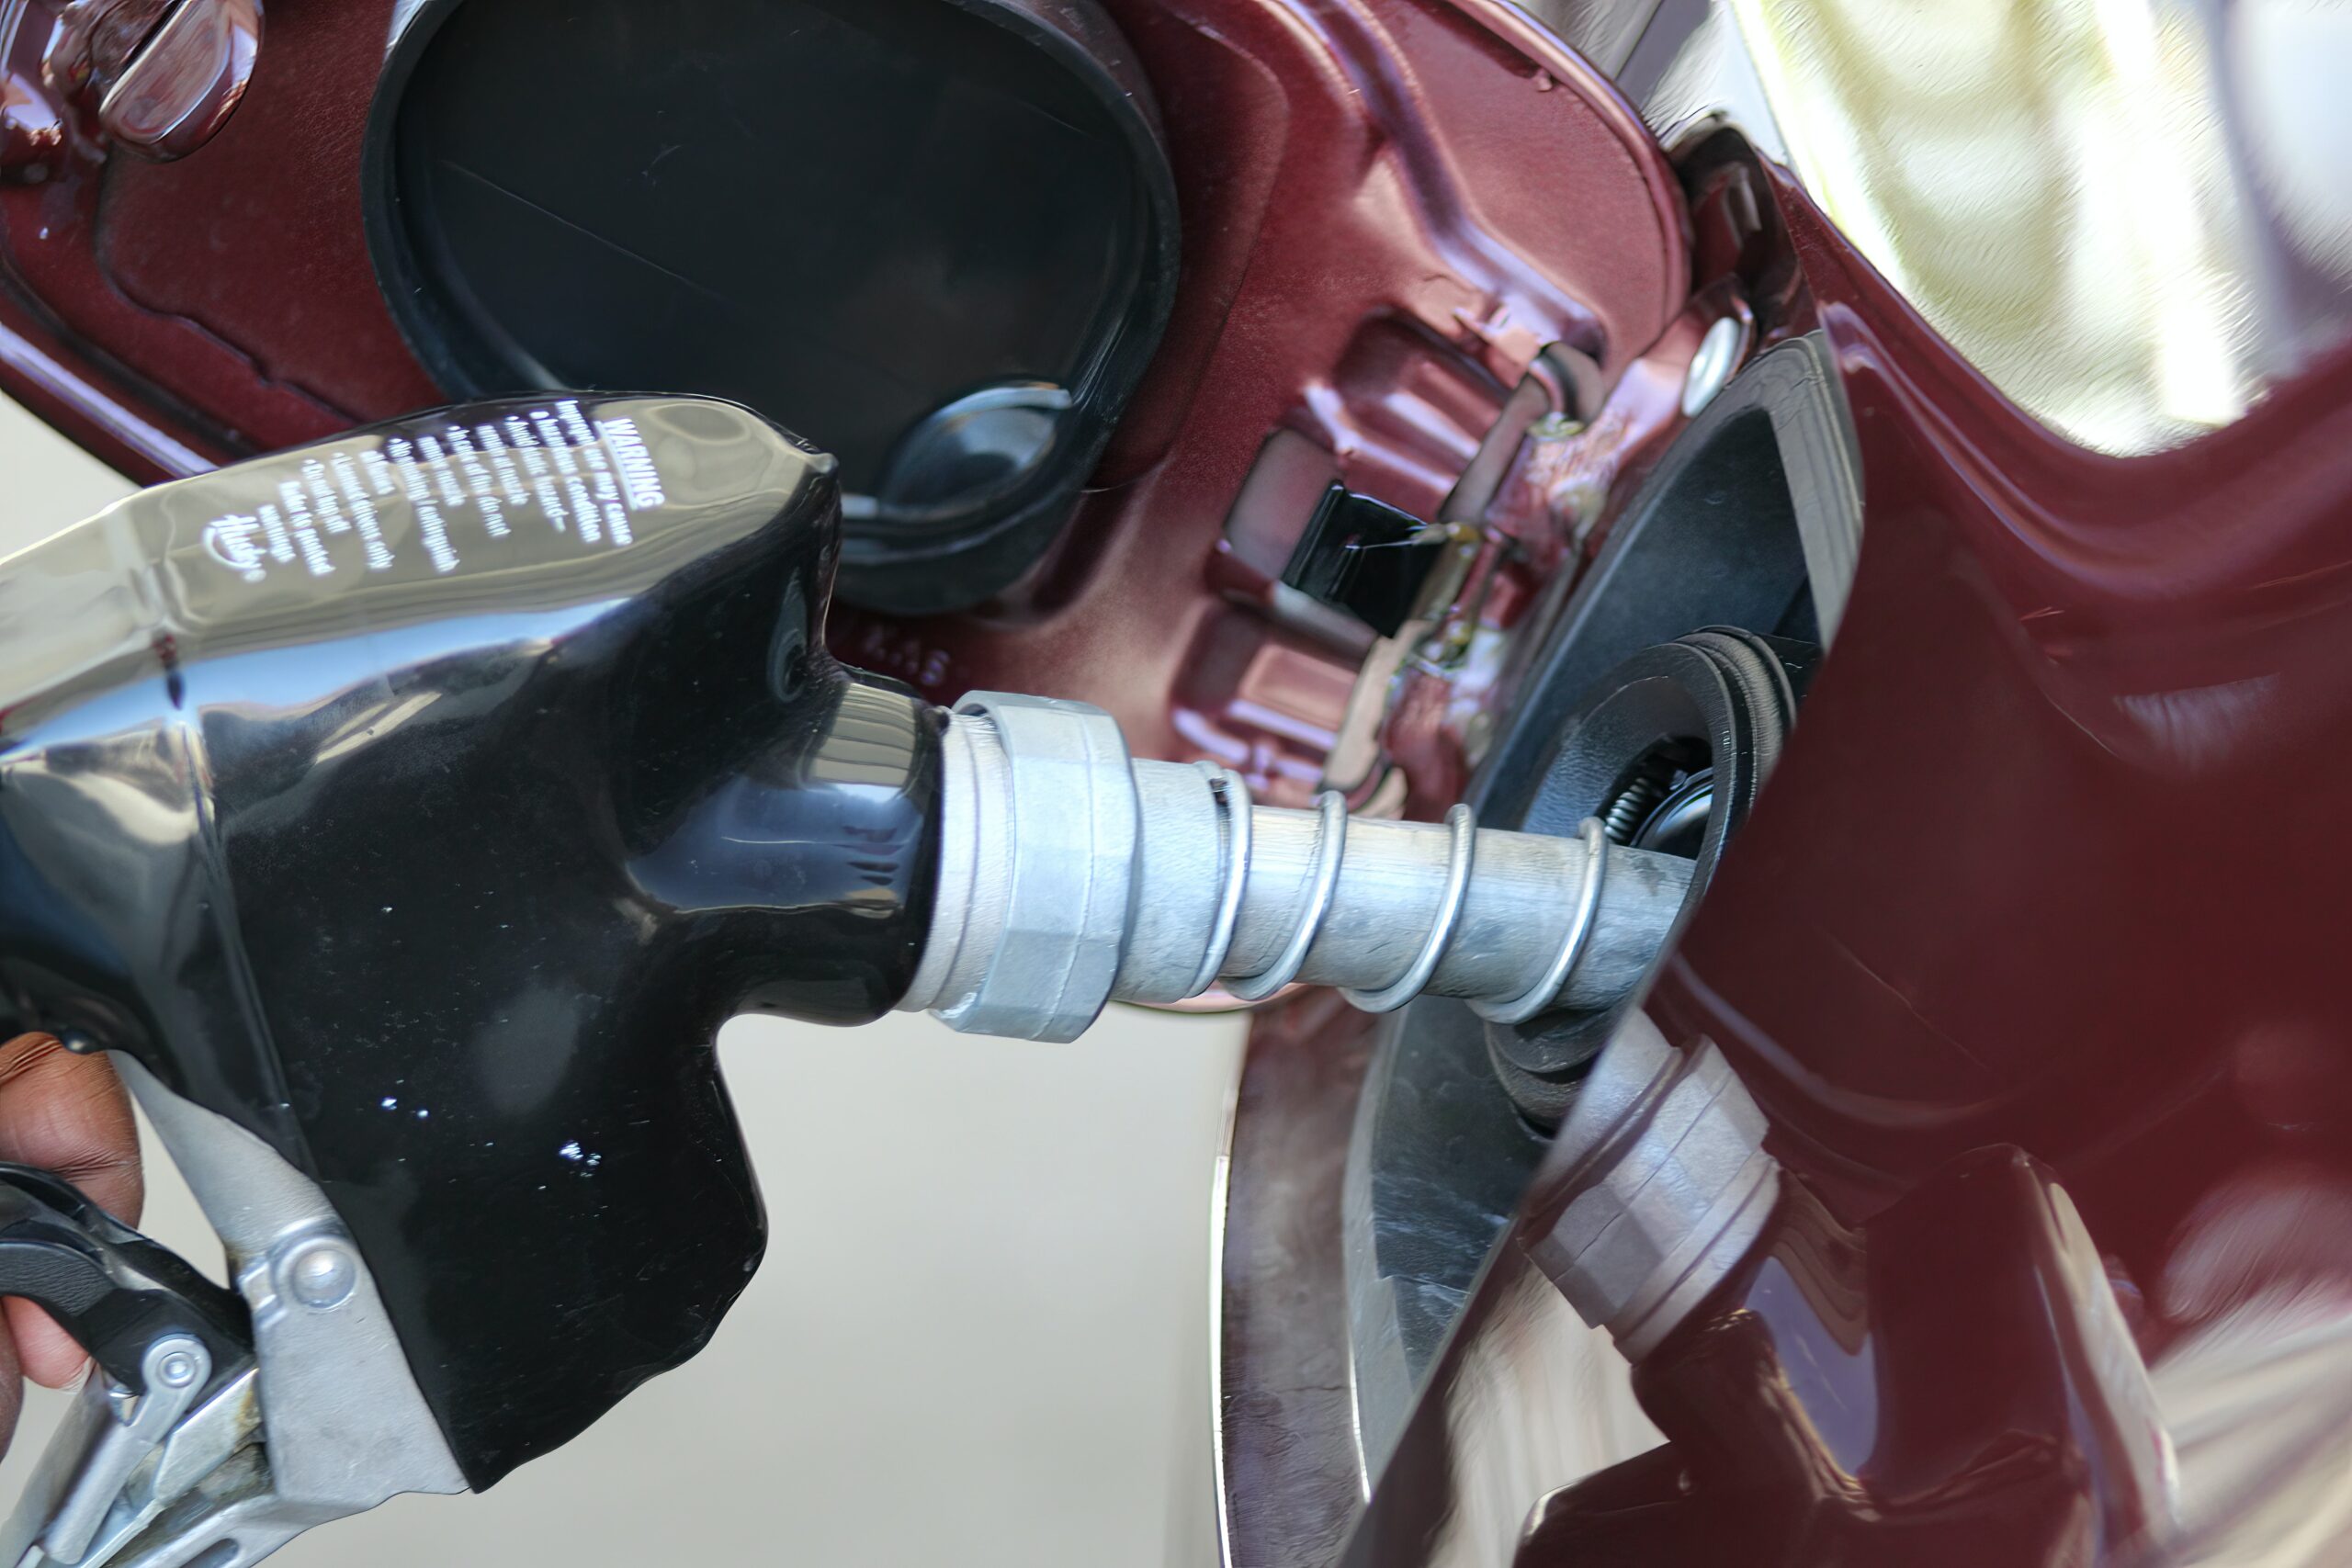 Gasoline prices hiked by 4% in line with Fair Prices deal